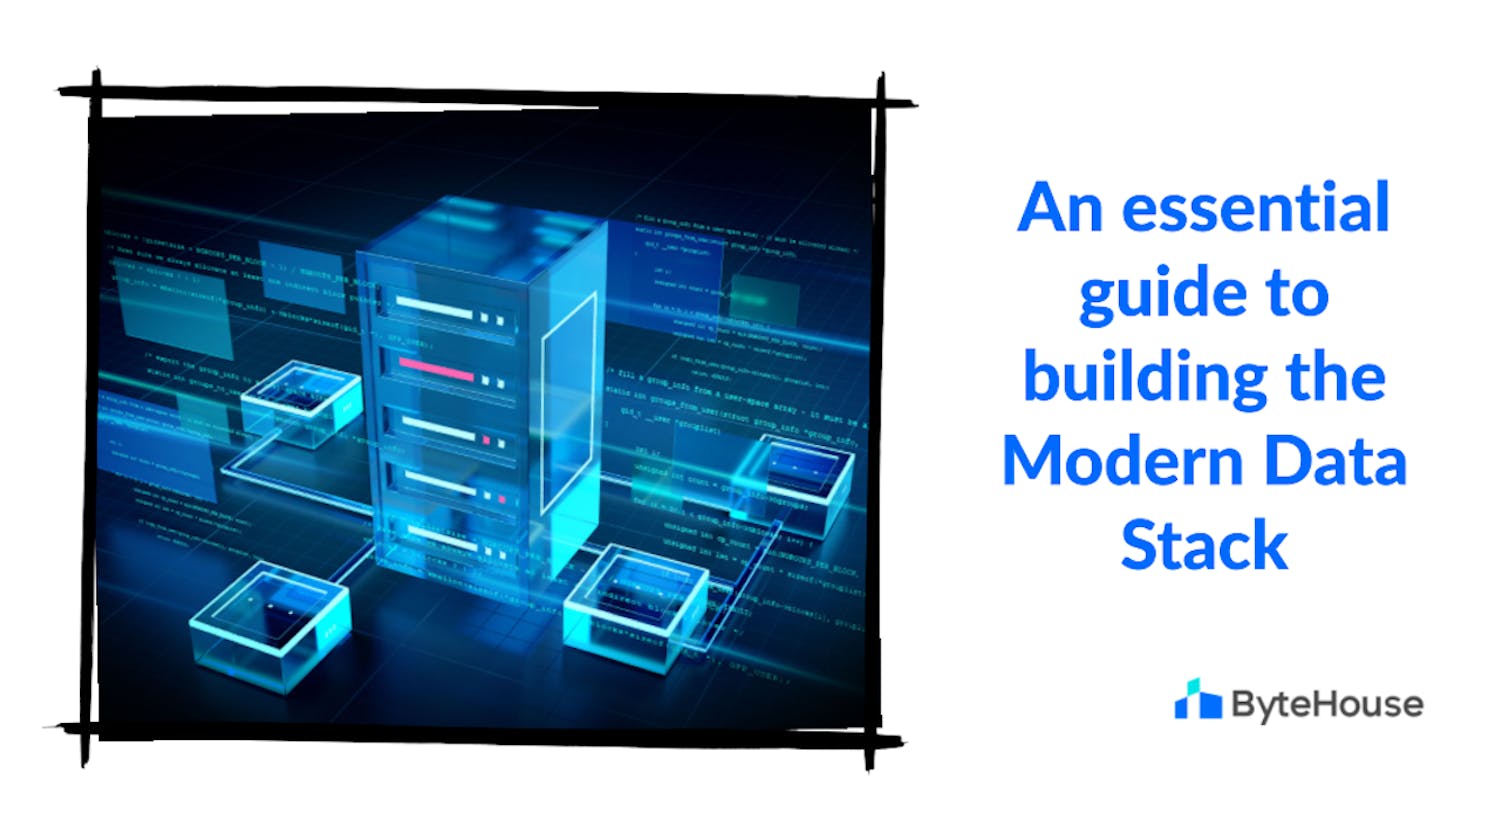 The Modern Data Stack - An essential guide